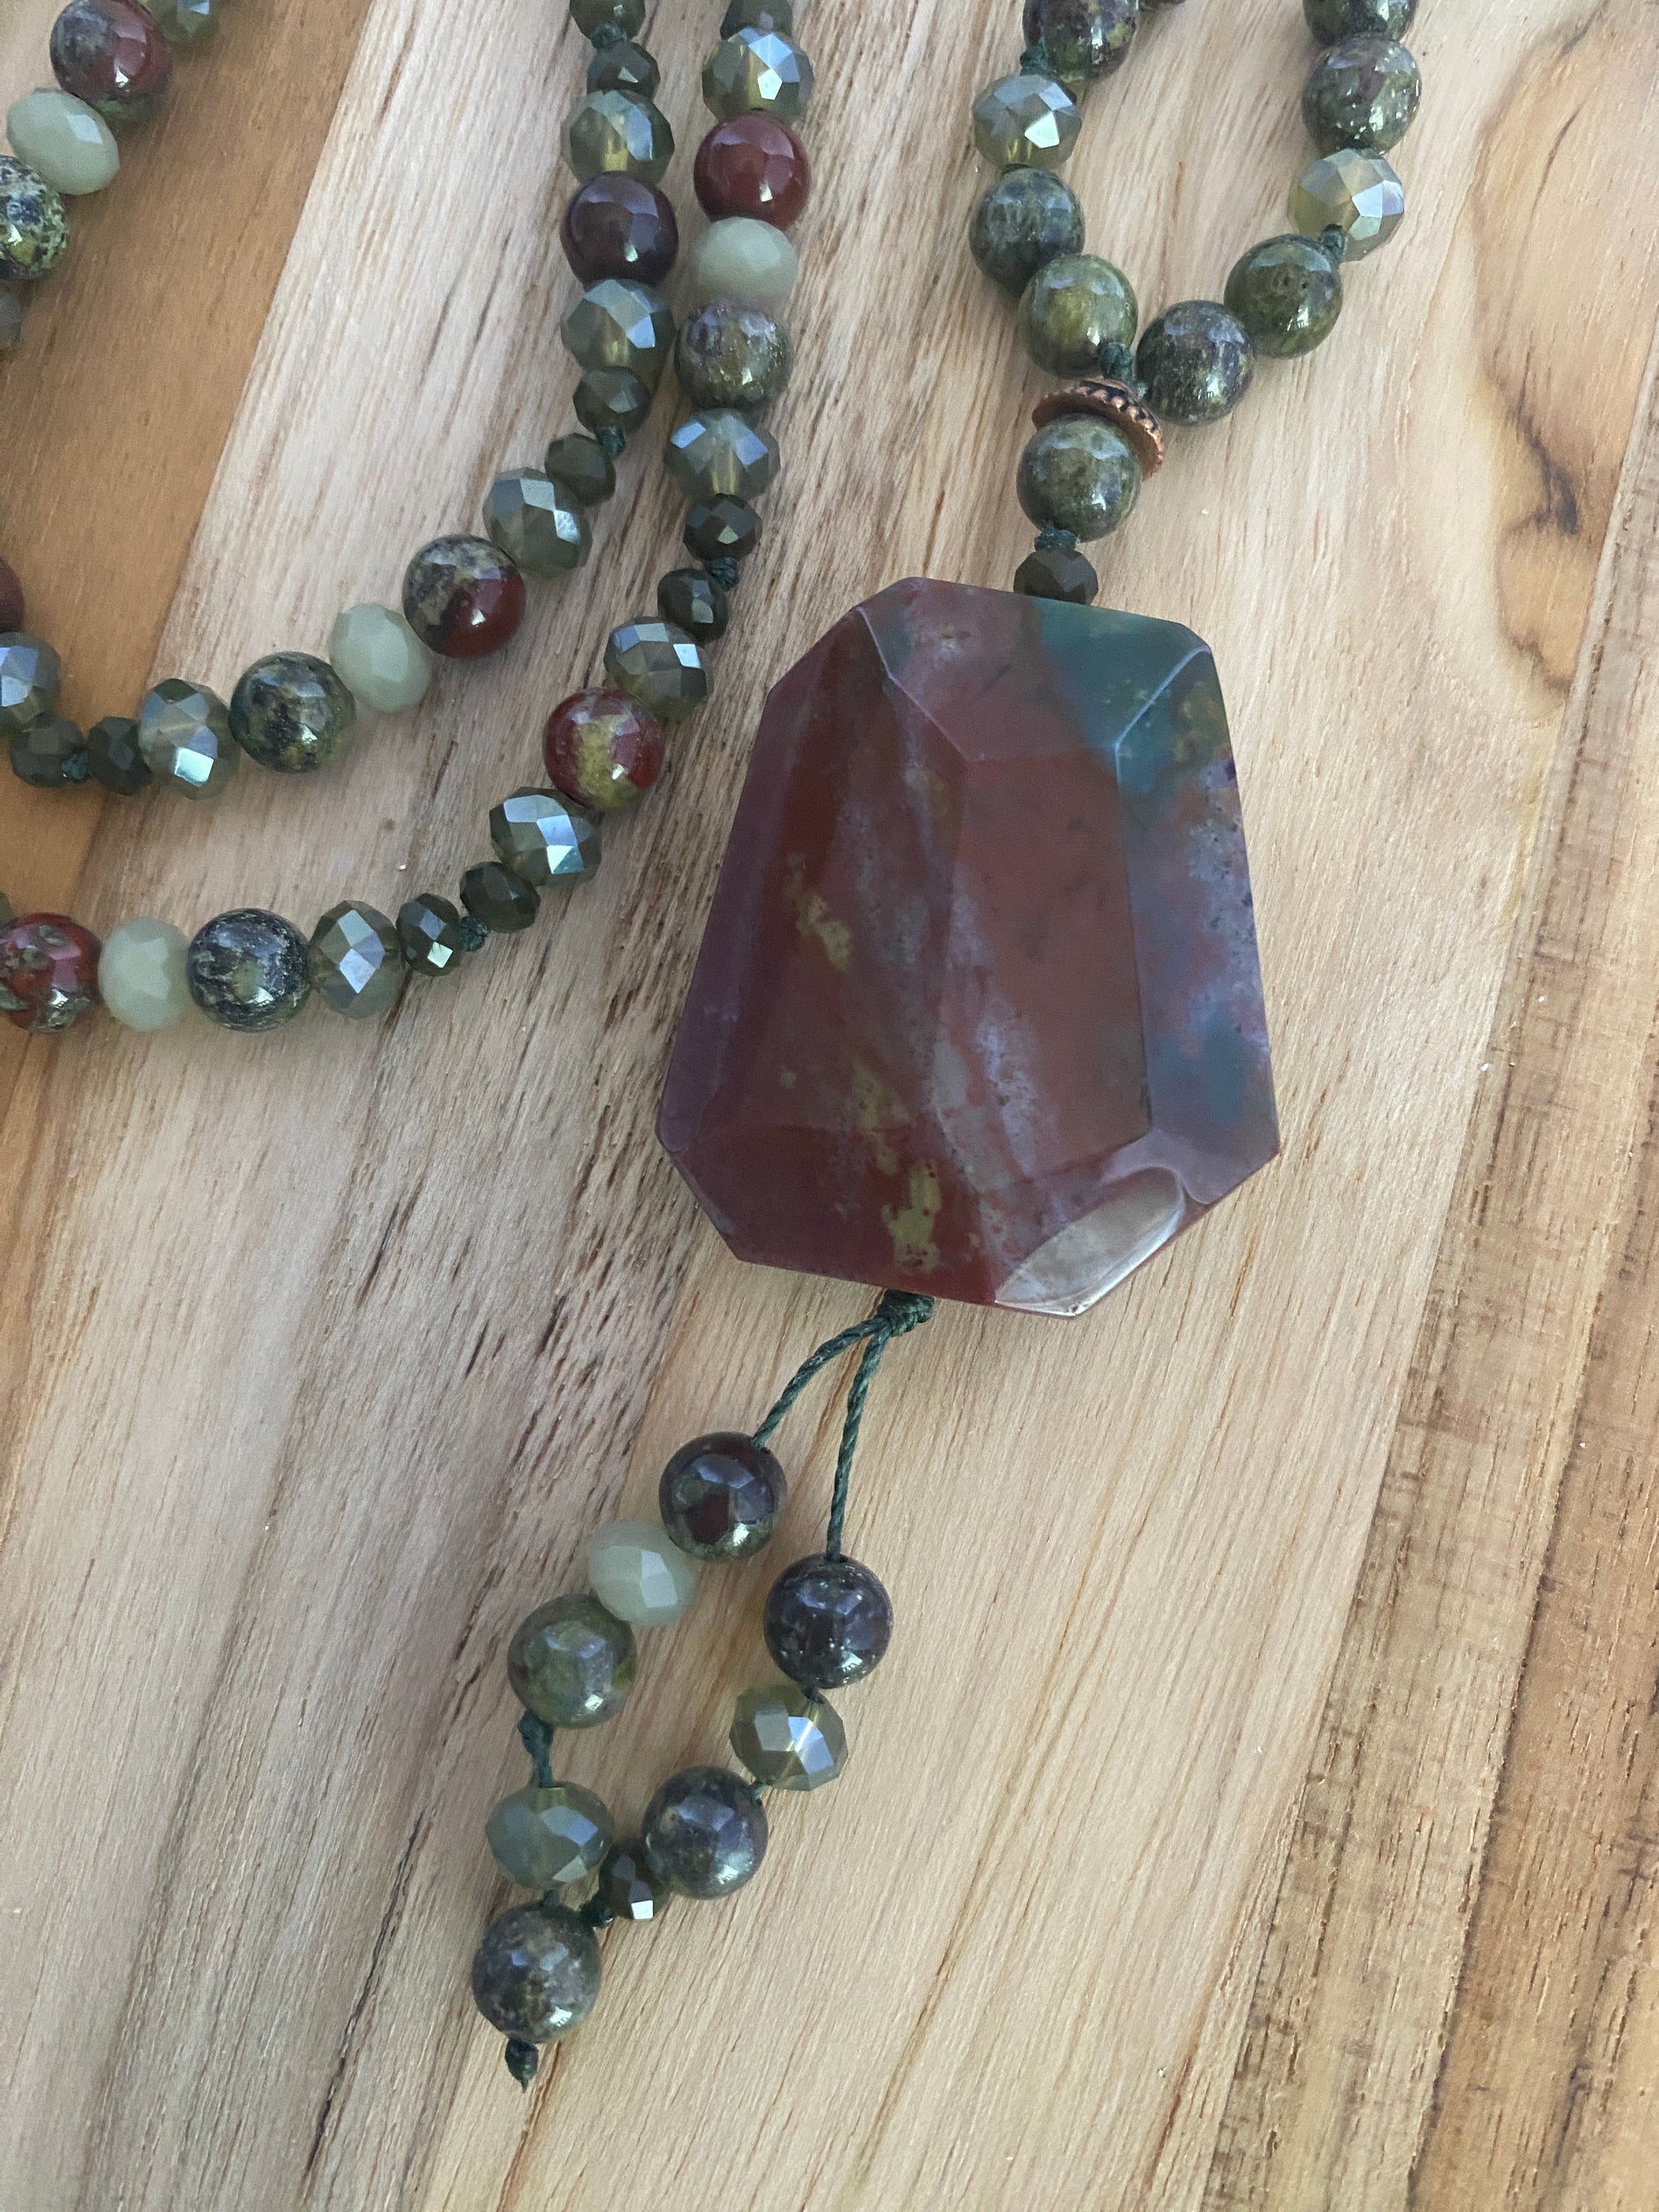 30" Long African Bloodstone & Crystal Necklace - My Urban Gems